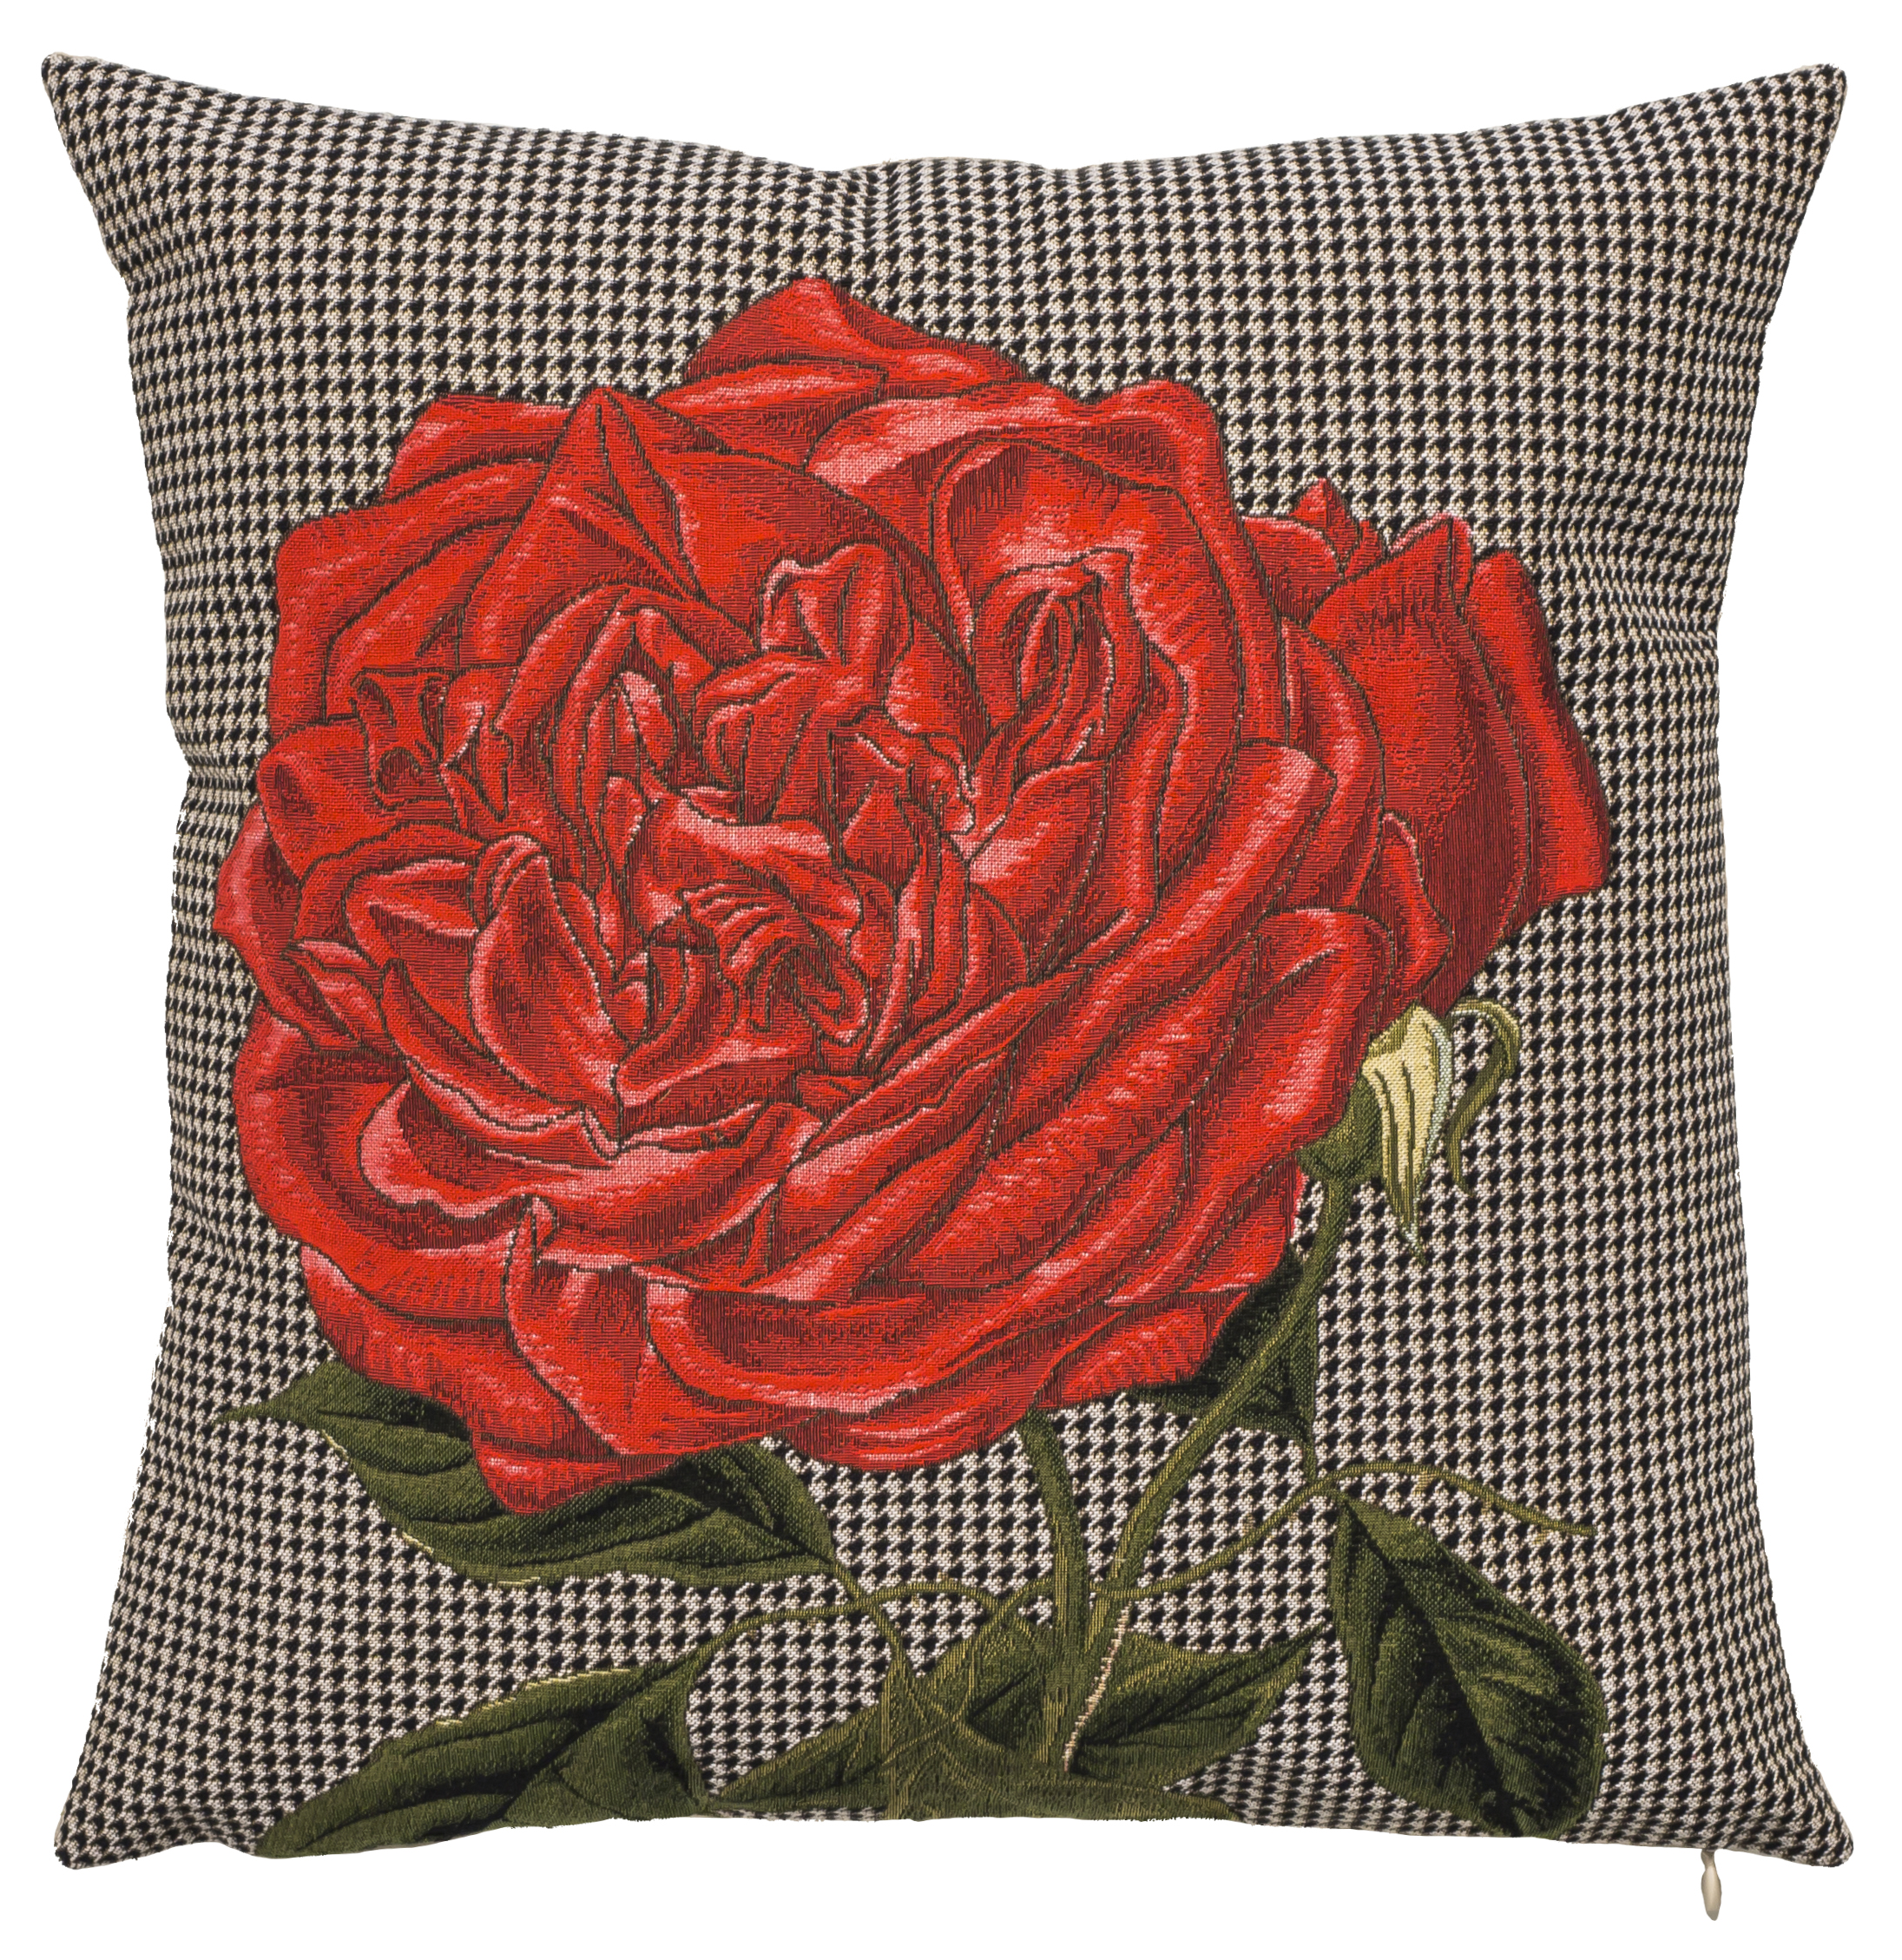 Pillow - Elisabeth - Red in Houndstooth Background